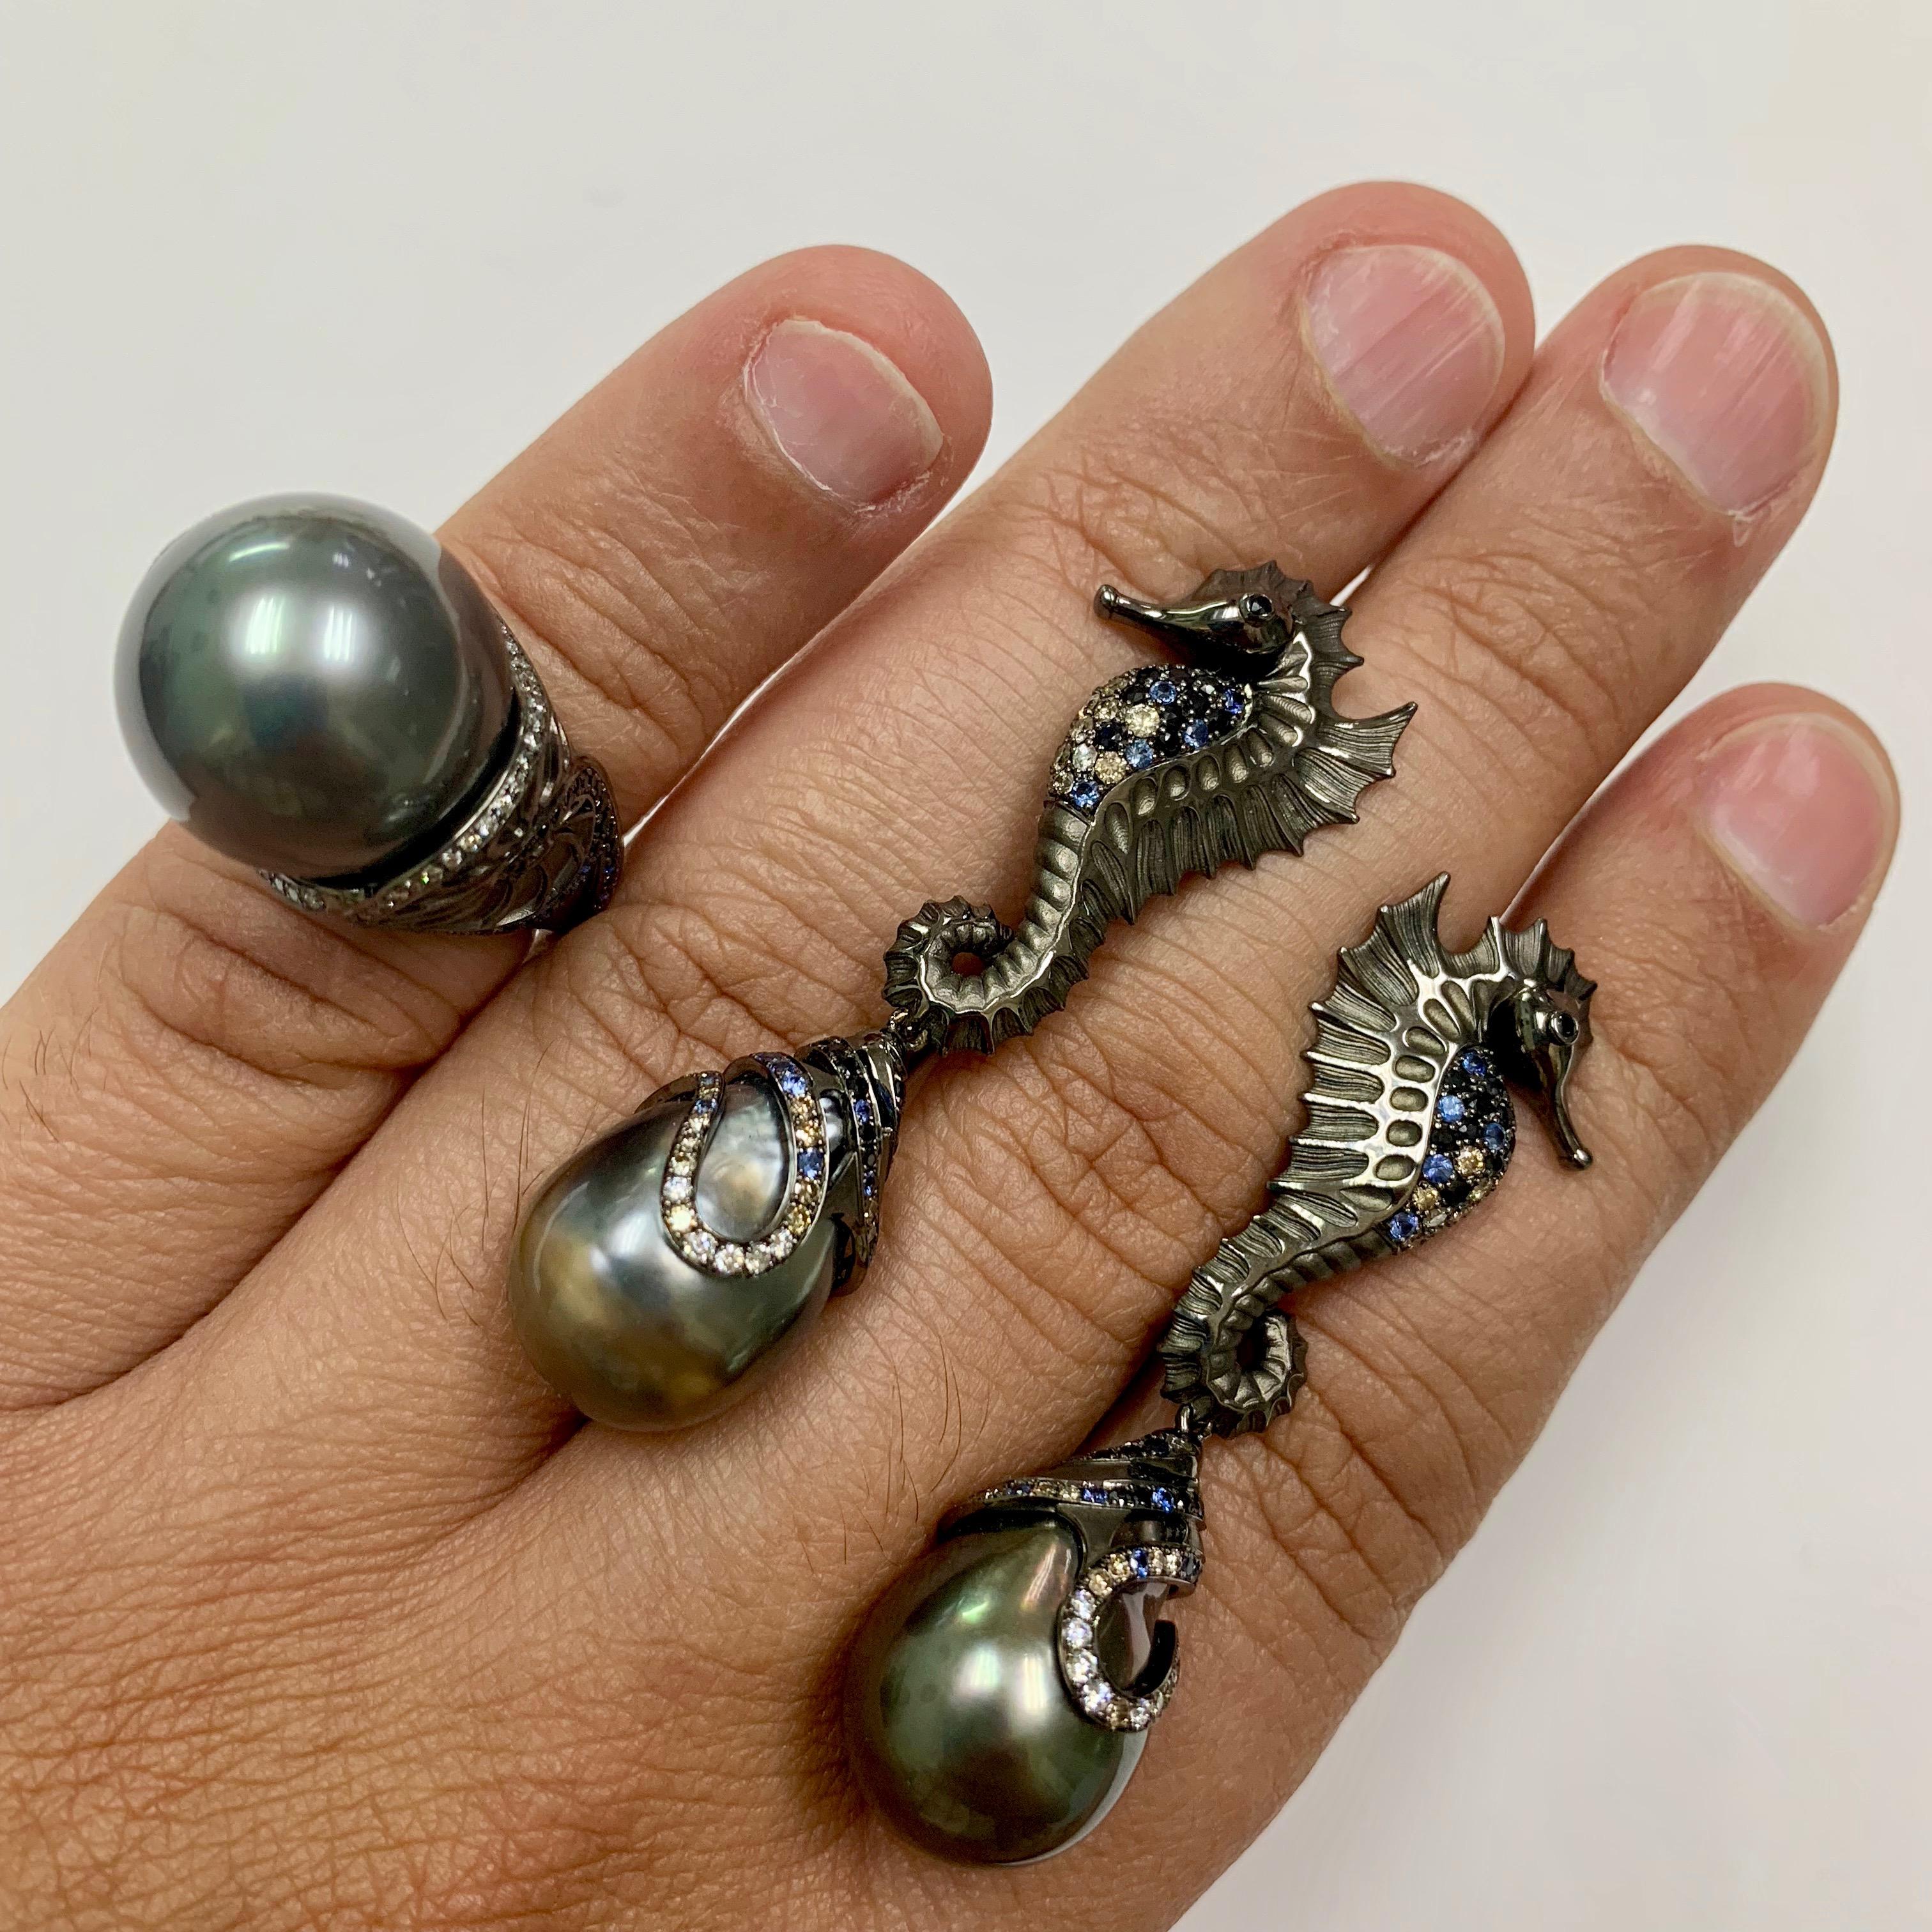 Diamond Sapphire Tahiti Pearl 18 Karat Black Gold SeaHorse Suite

Did You ever seen the mystycal deepness of the ocean? Did You ever meet inhabitants of it? Mousson Atelier will opend this part of unseen especially for You! Gorgeous Ammonite ring